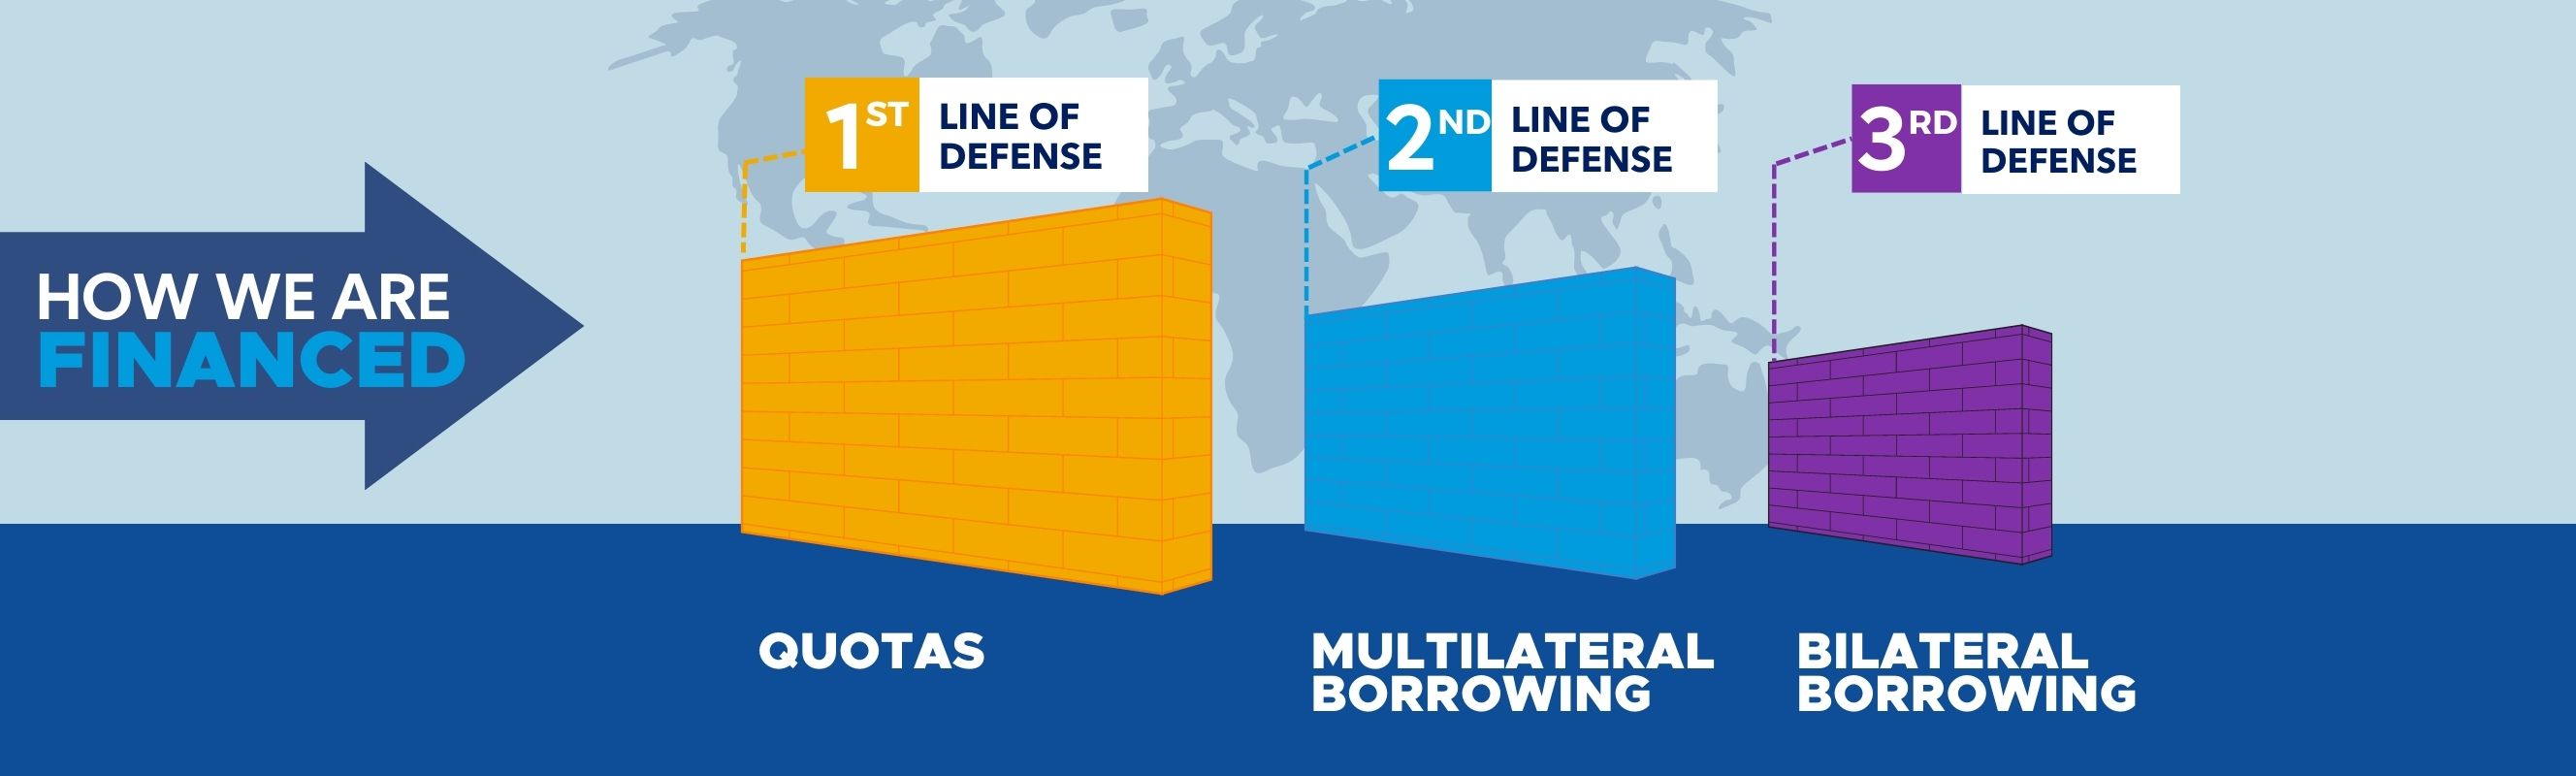 Lines of defense IMF